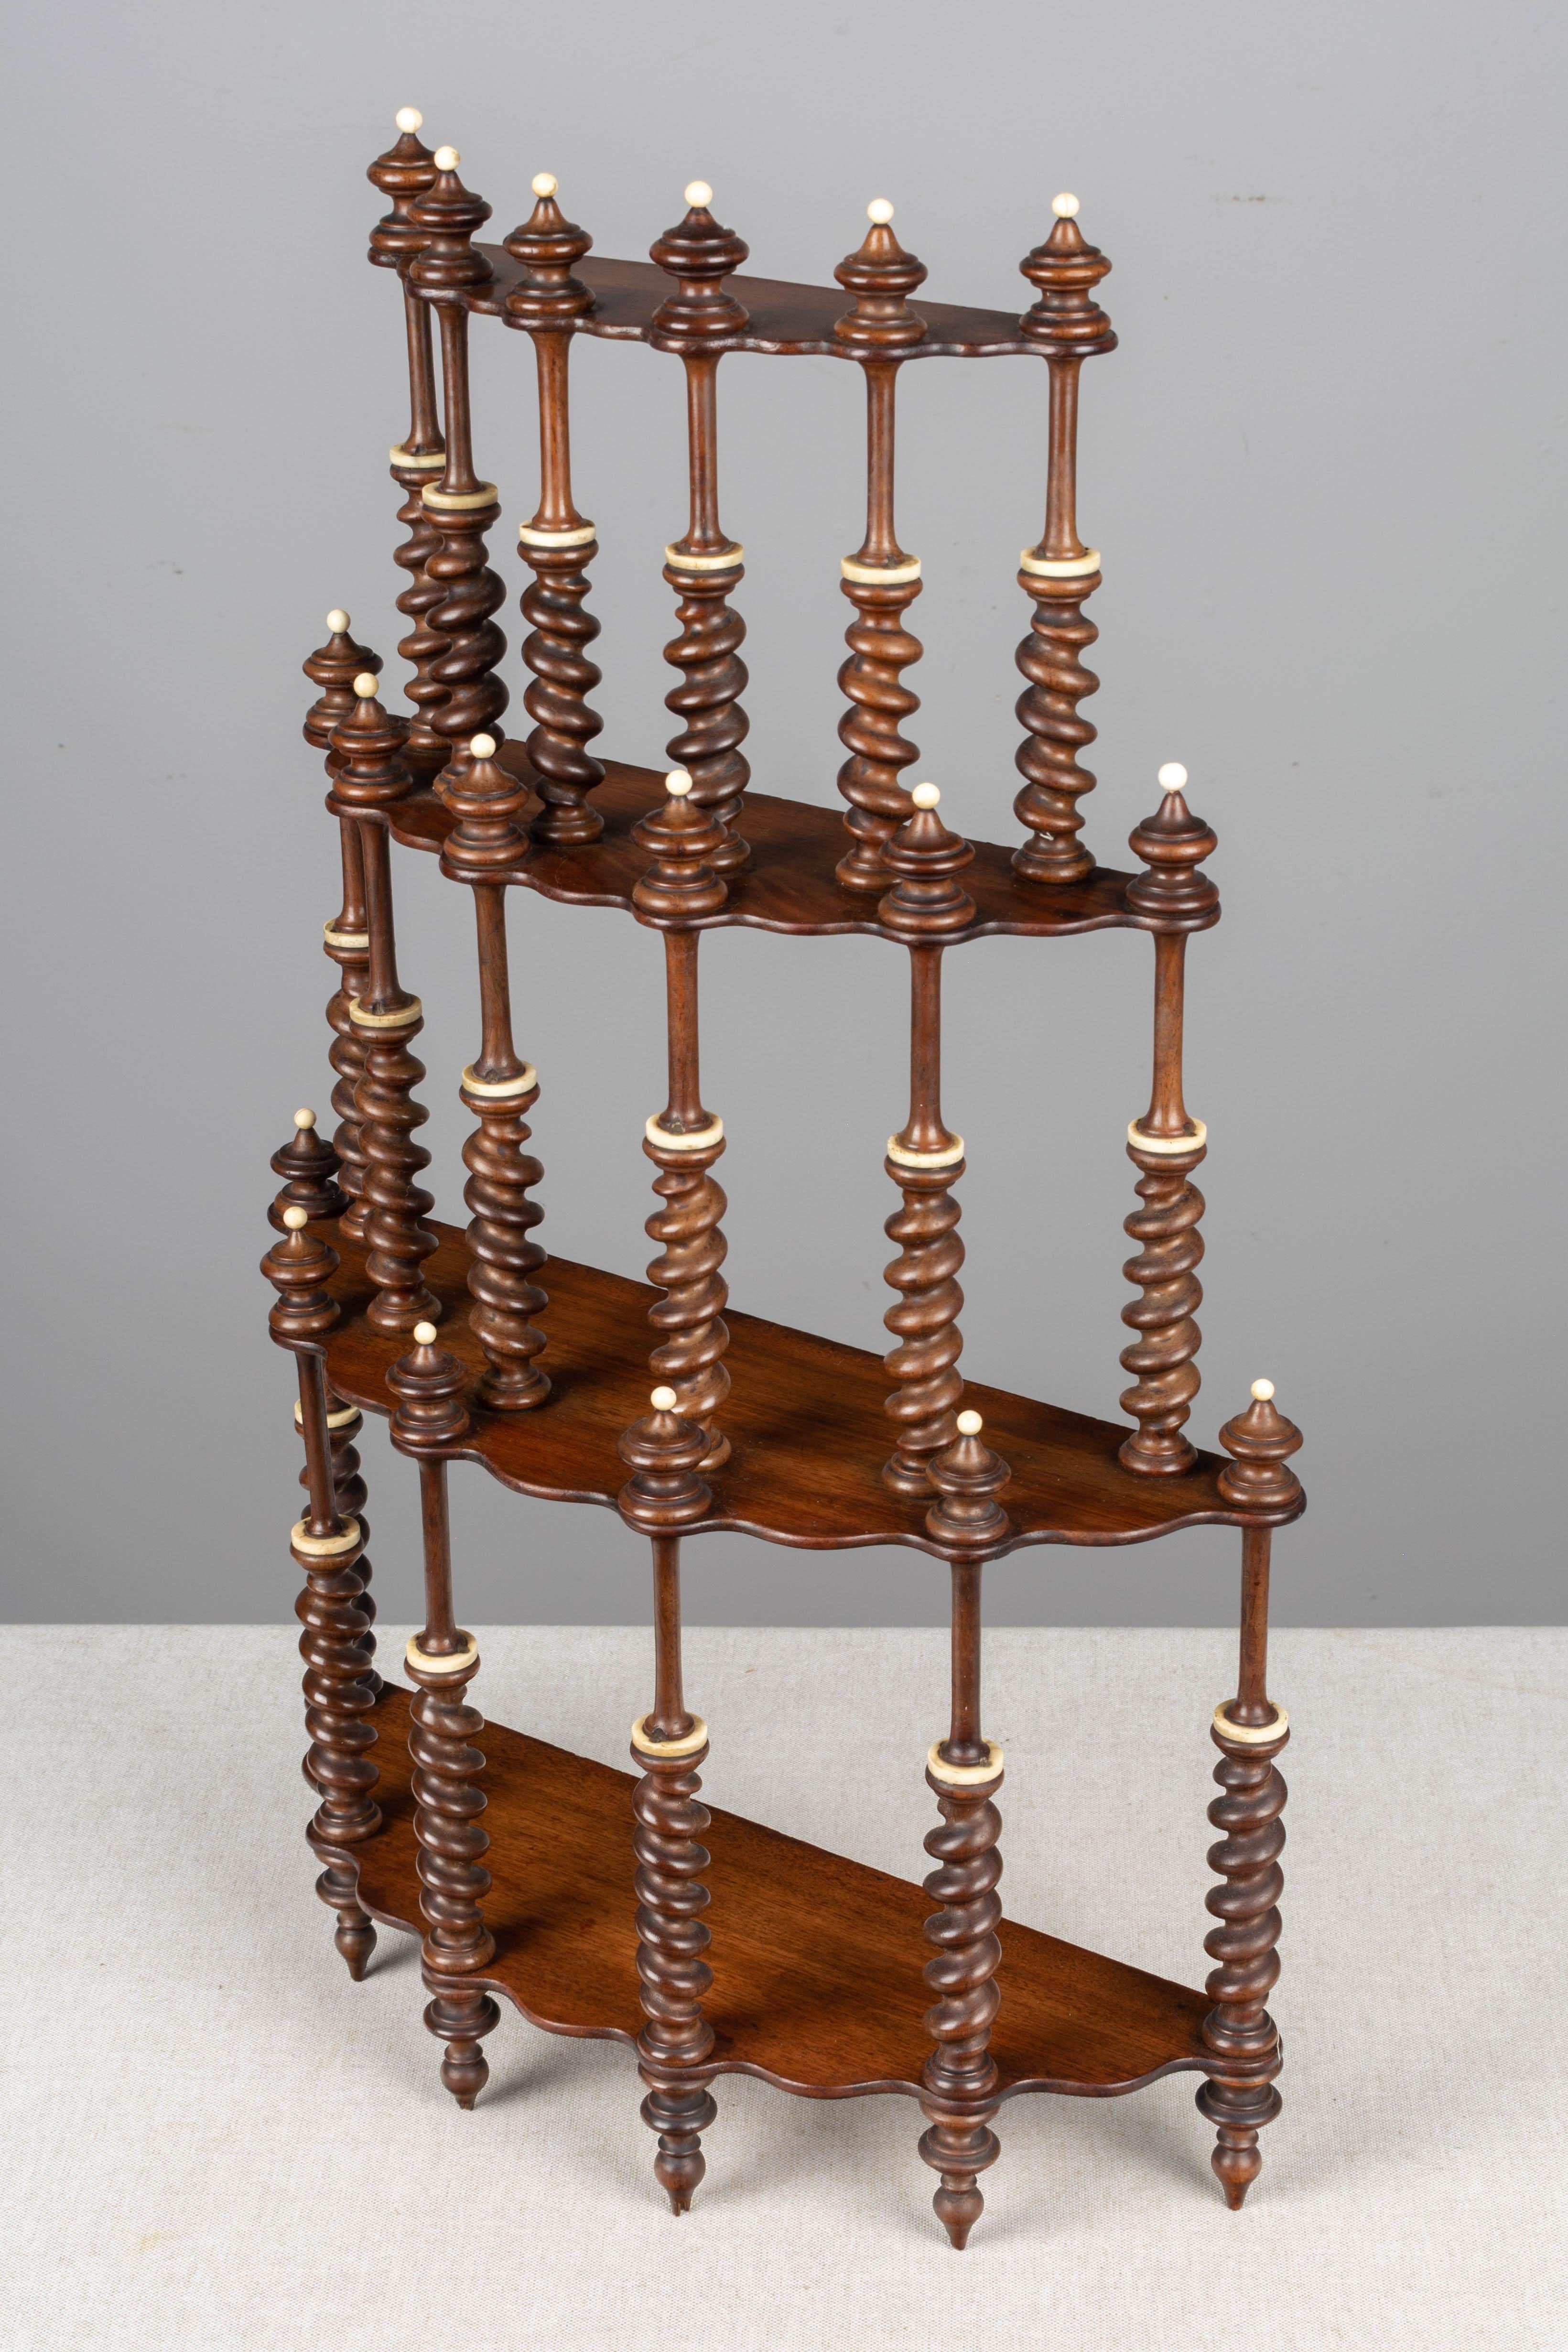 Hand-Crafted 19th Century French Mahogany Turned Spindle Shelf For Sale